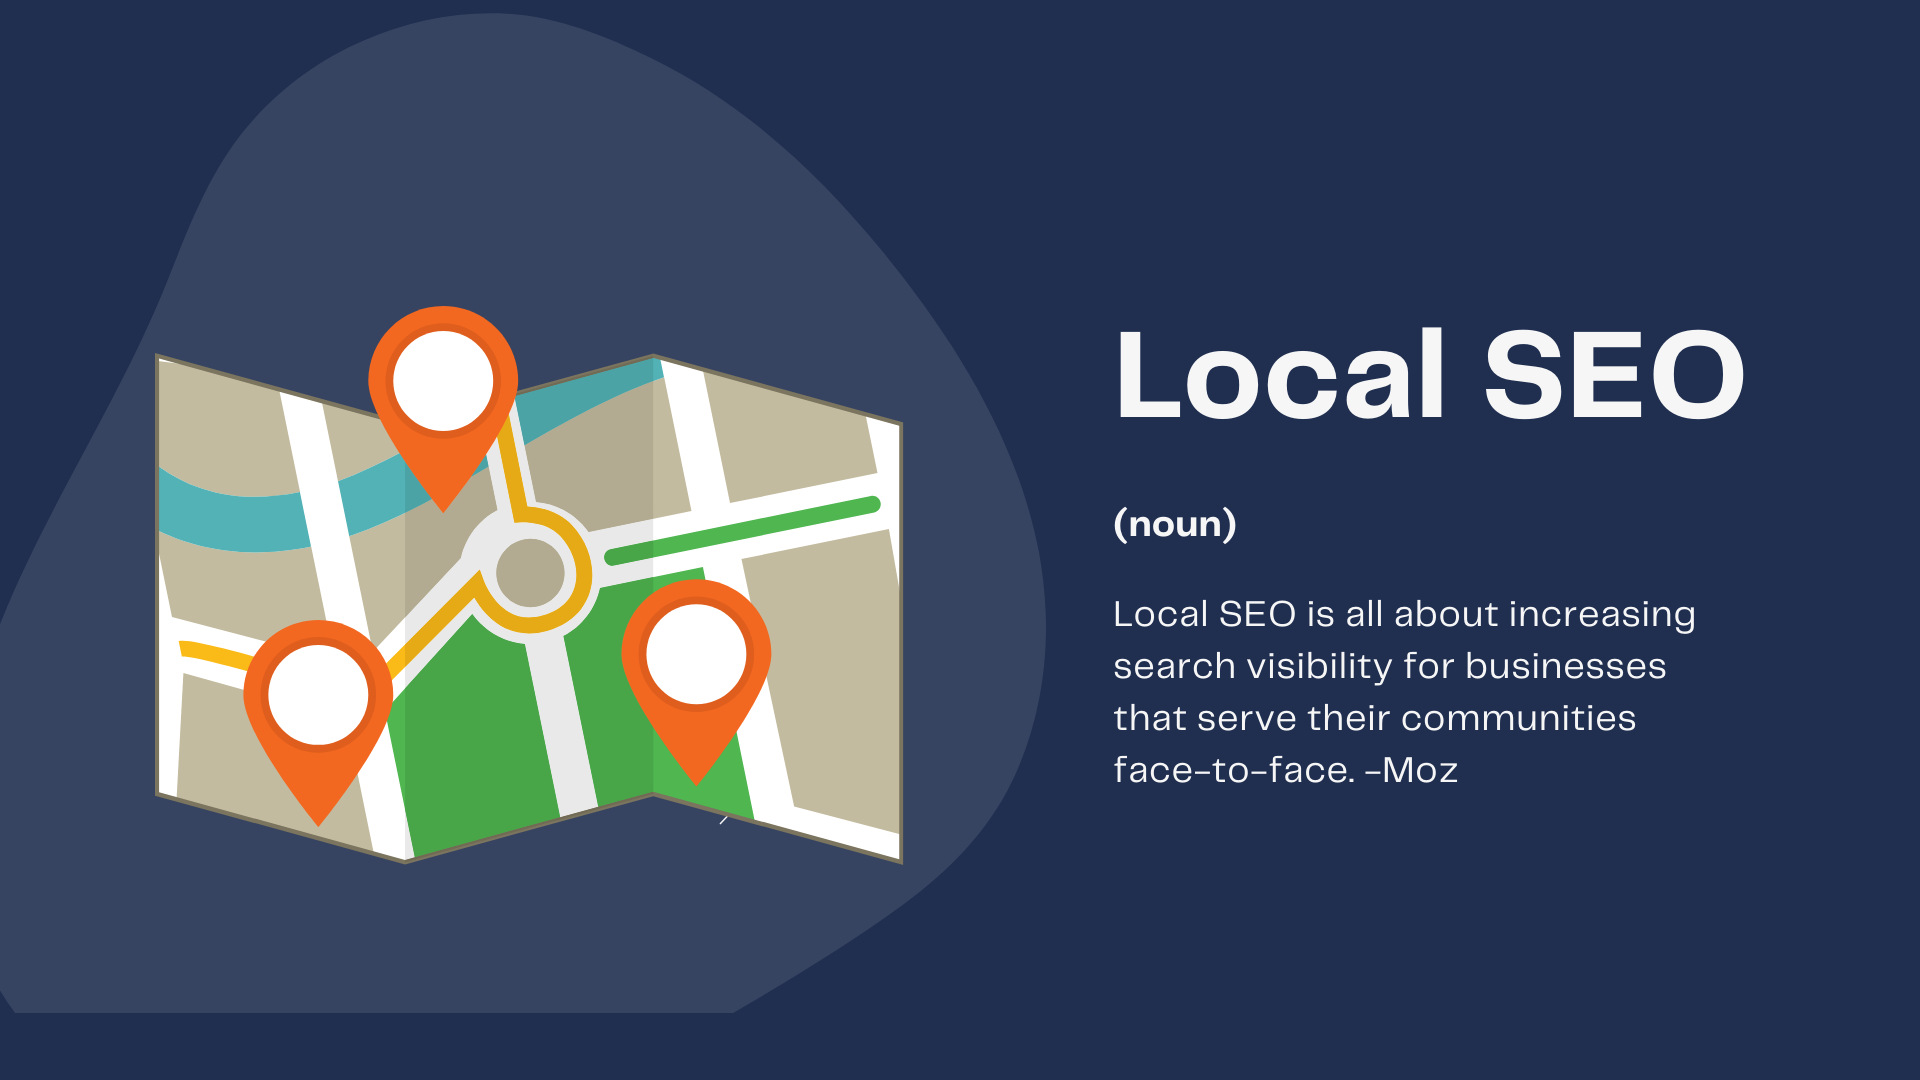 Local SEO is all about increasing search visibility for businesses that serve their communities face-to-face. -Moz